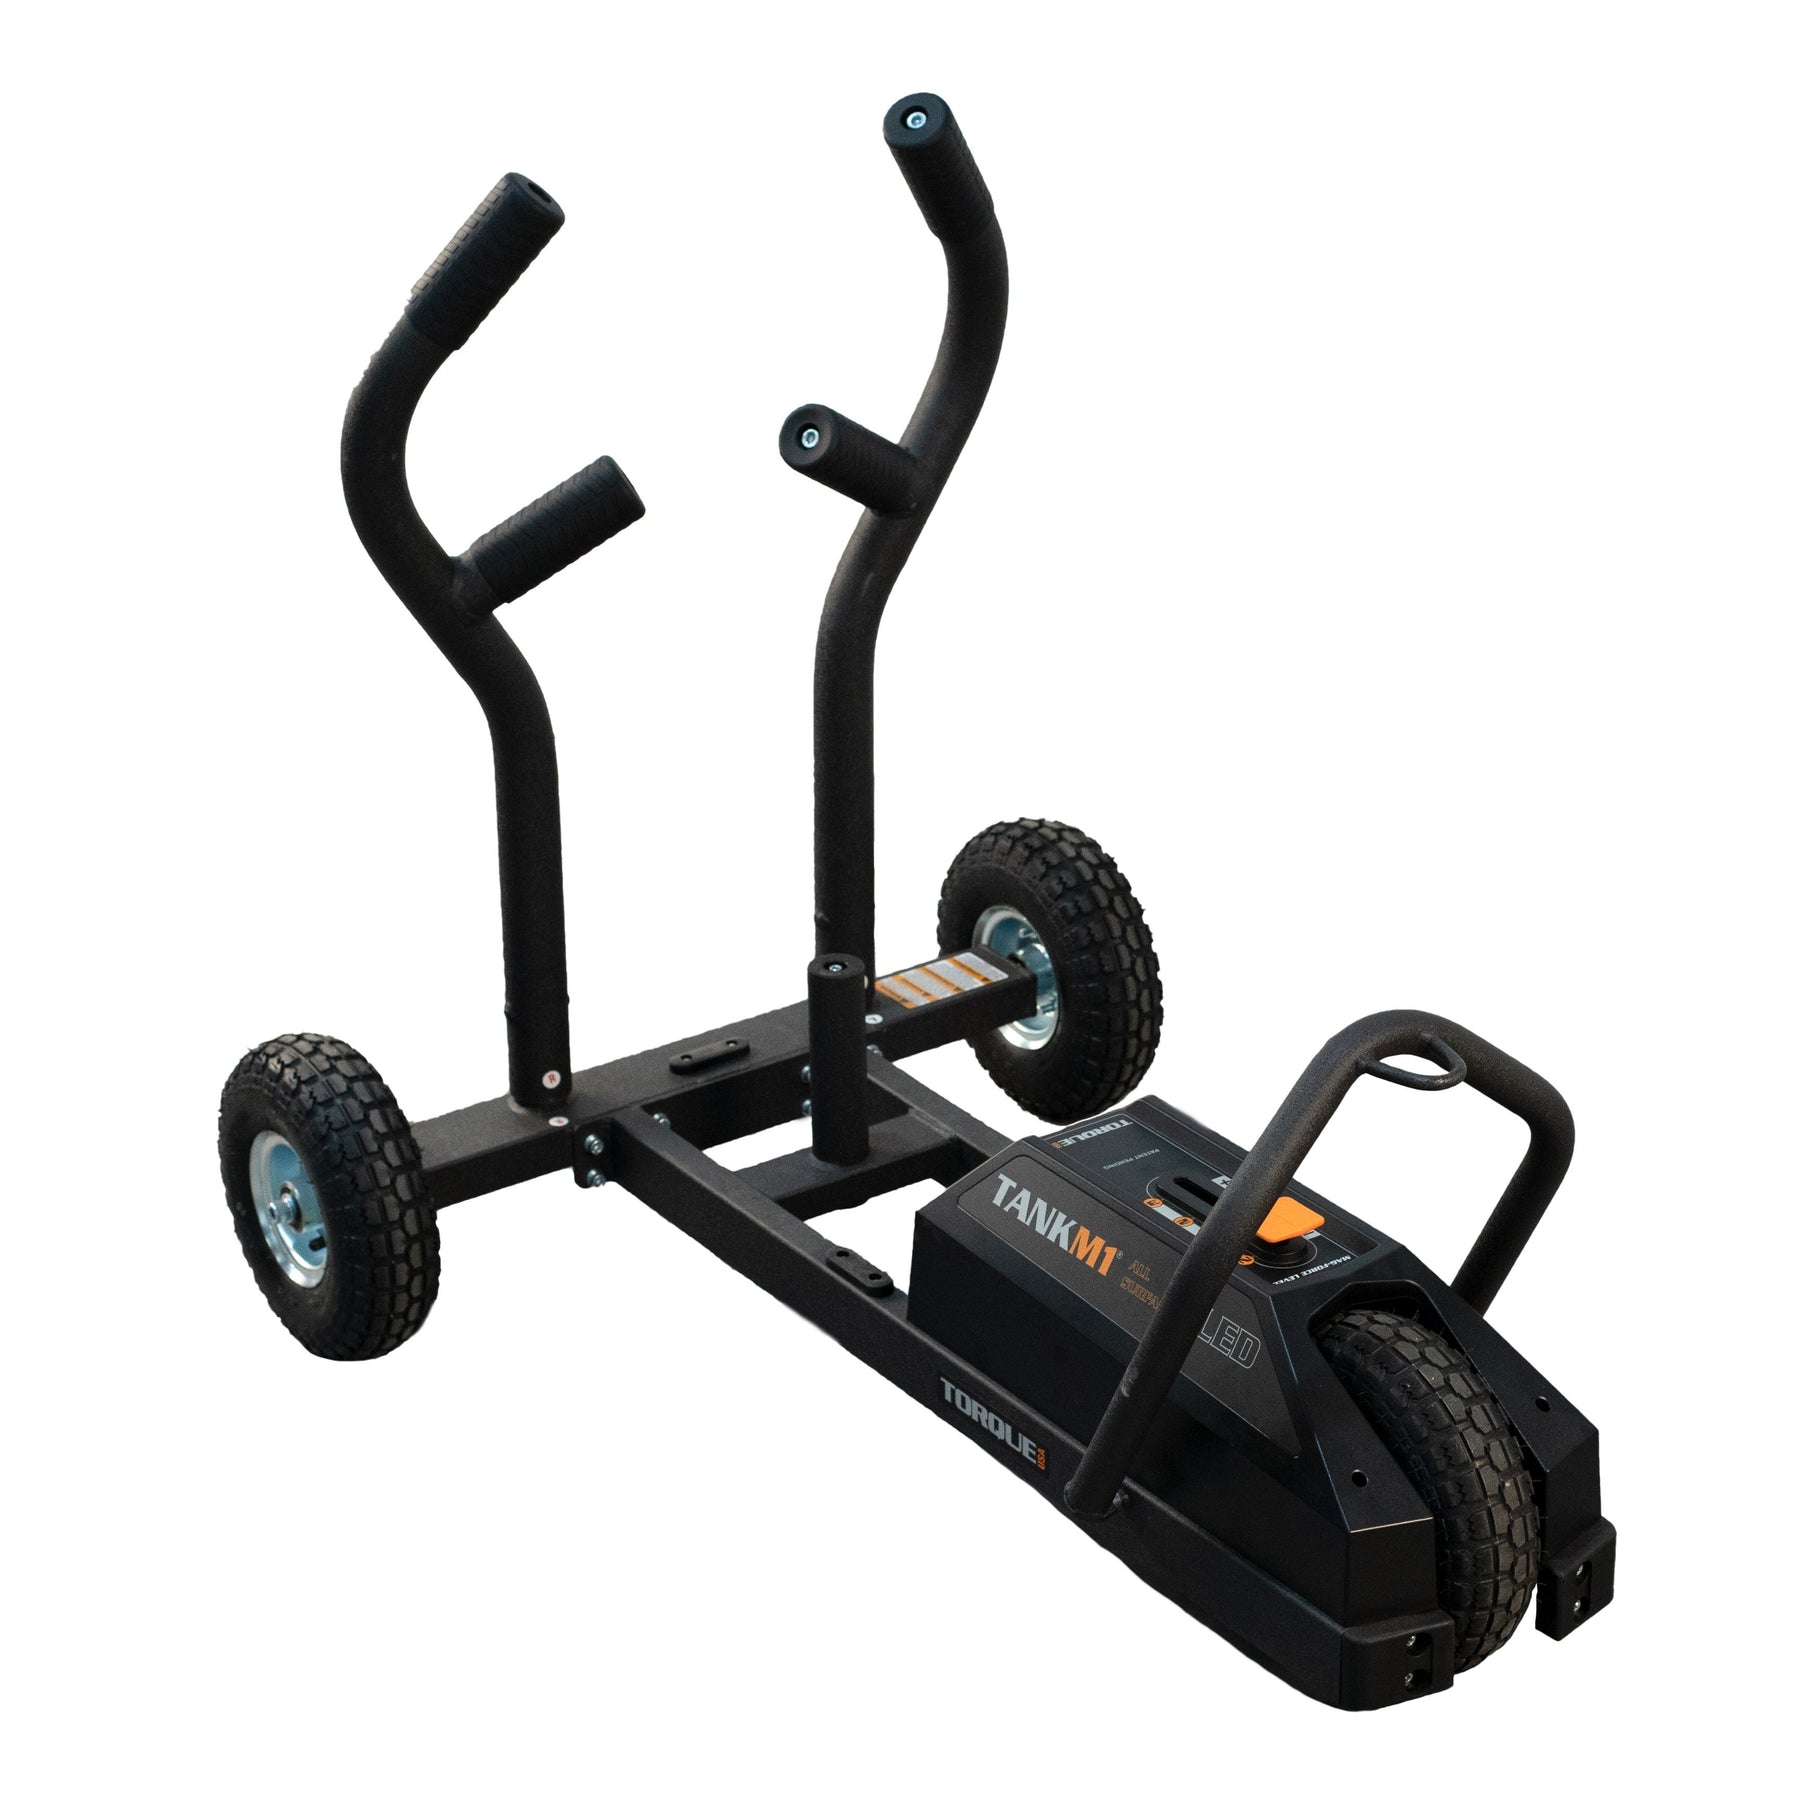 Torque TANK M4 All Surface Push Sled